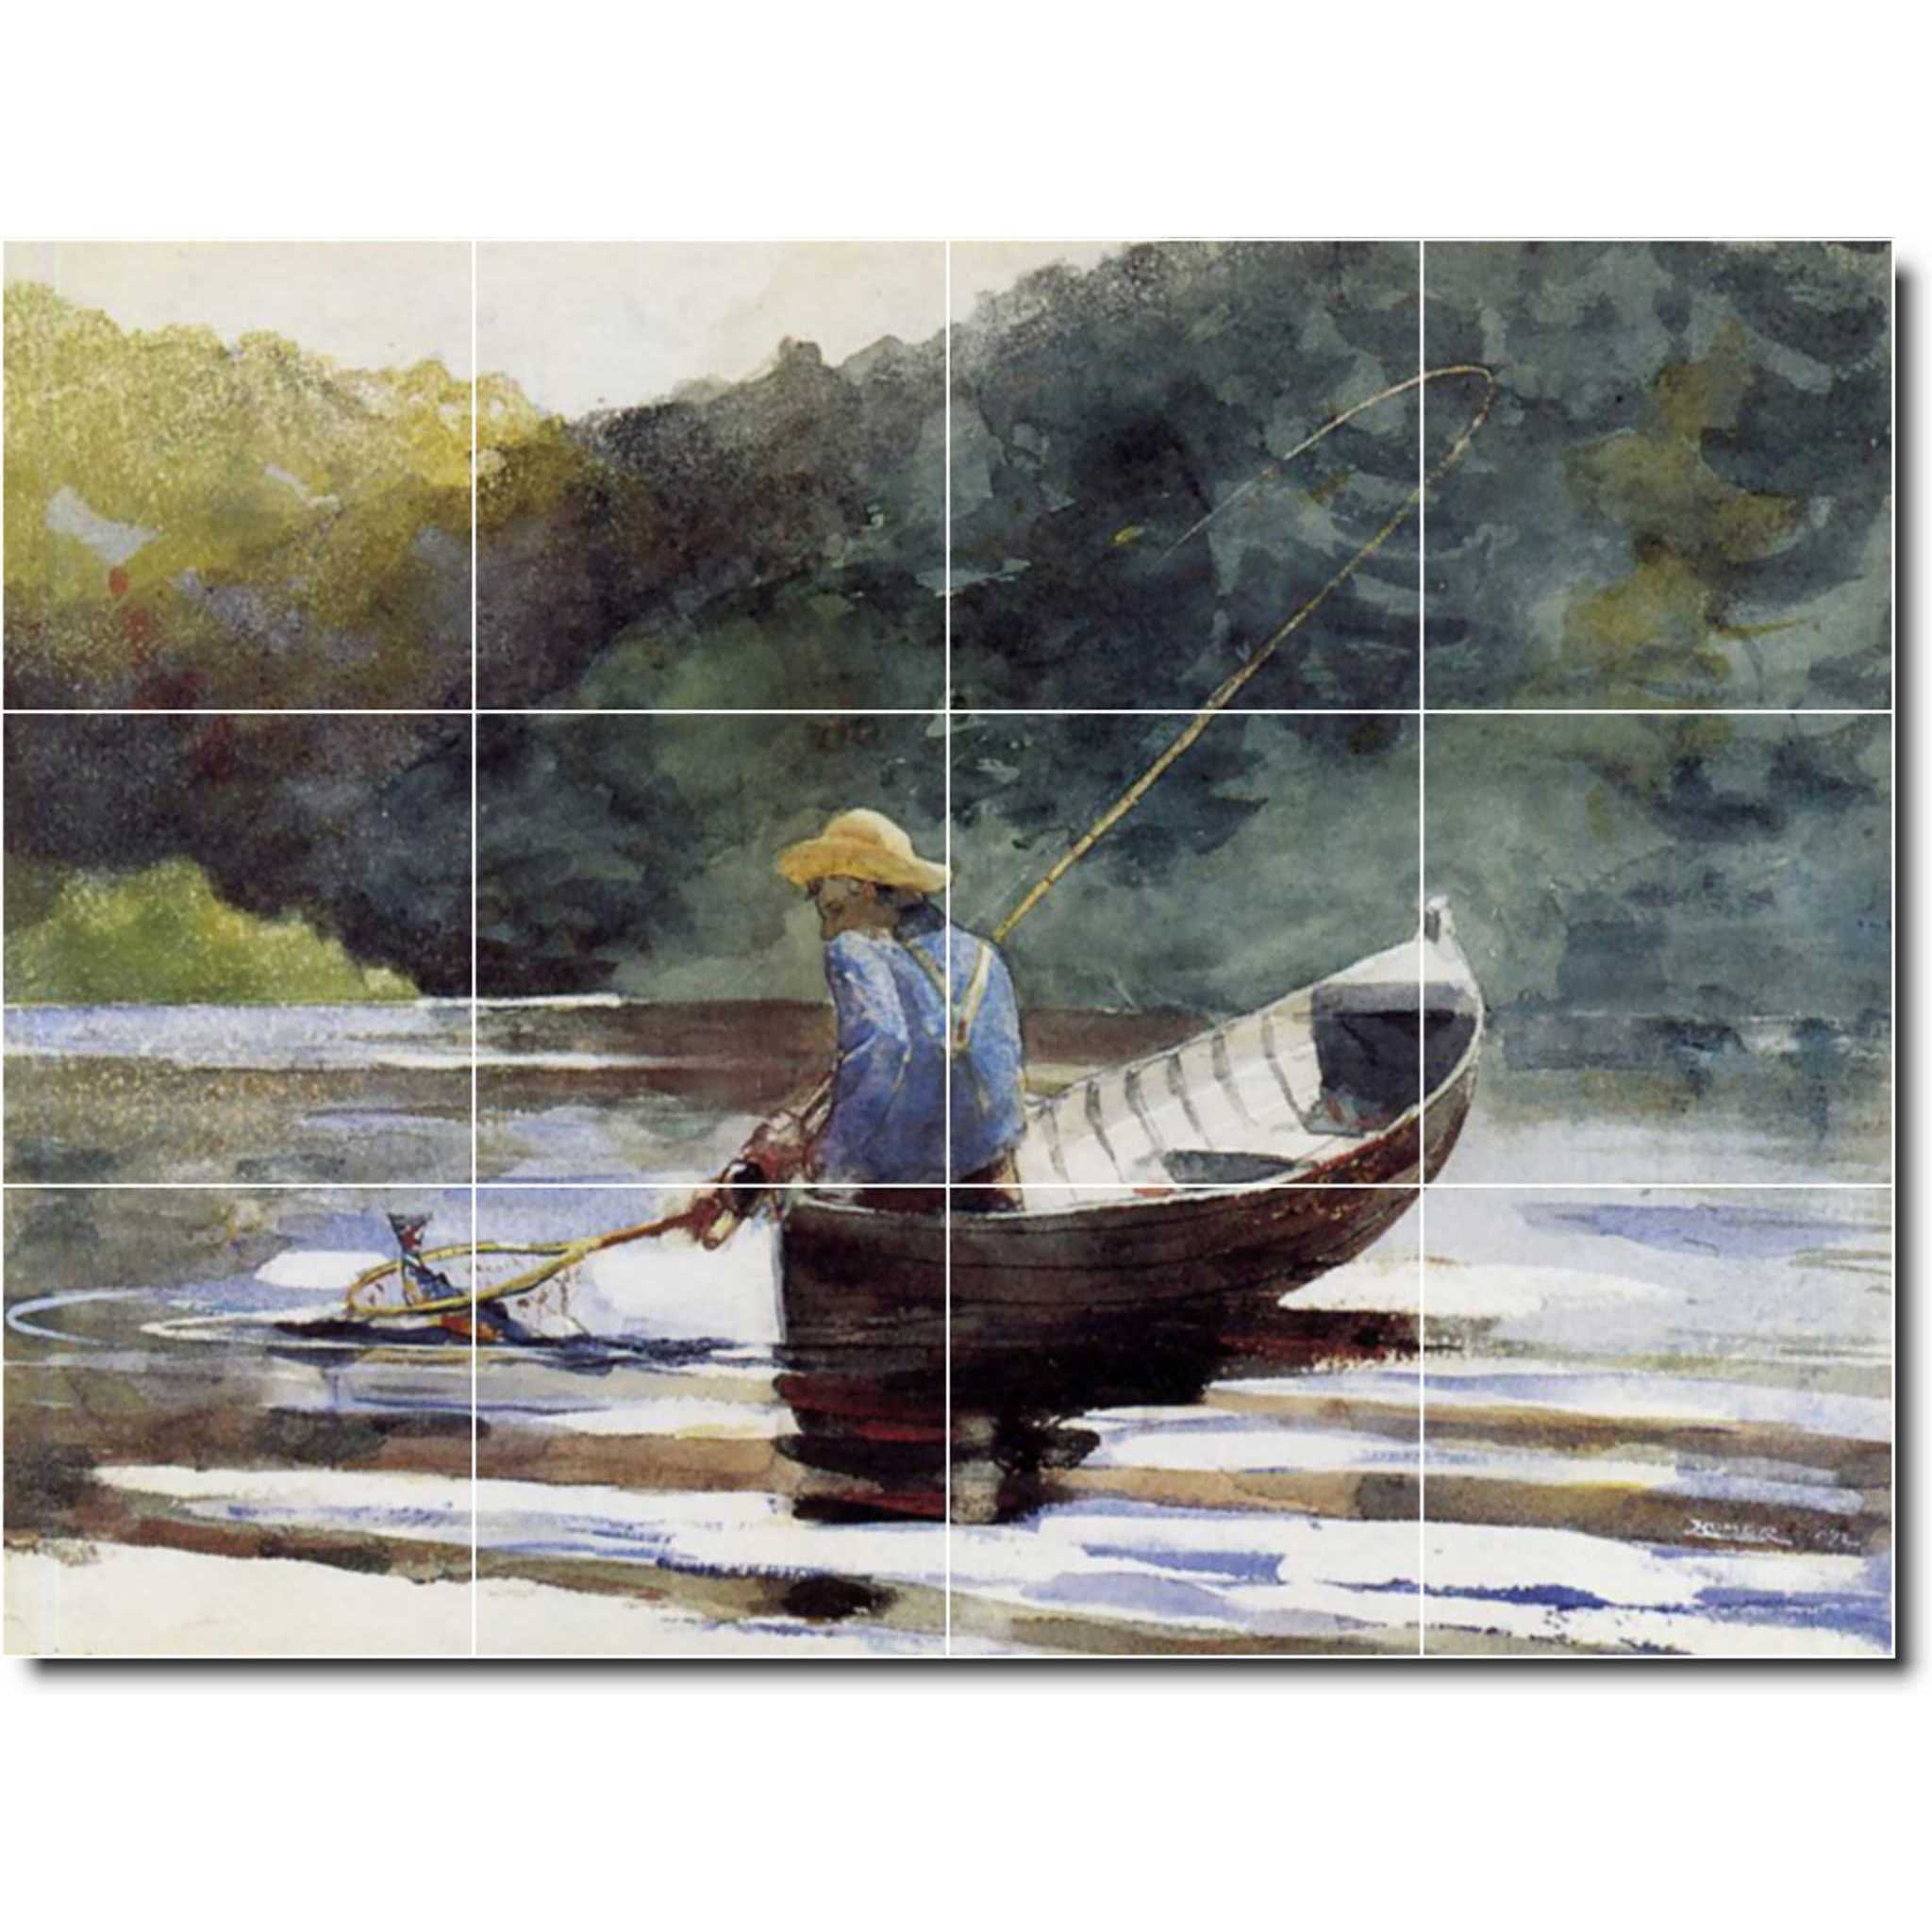 Winslow Homer Waterfront Painting Ceramic Tile Mural P04350-XL. 48"W x 36"H (12) 12x12 tiles